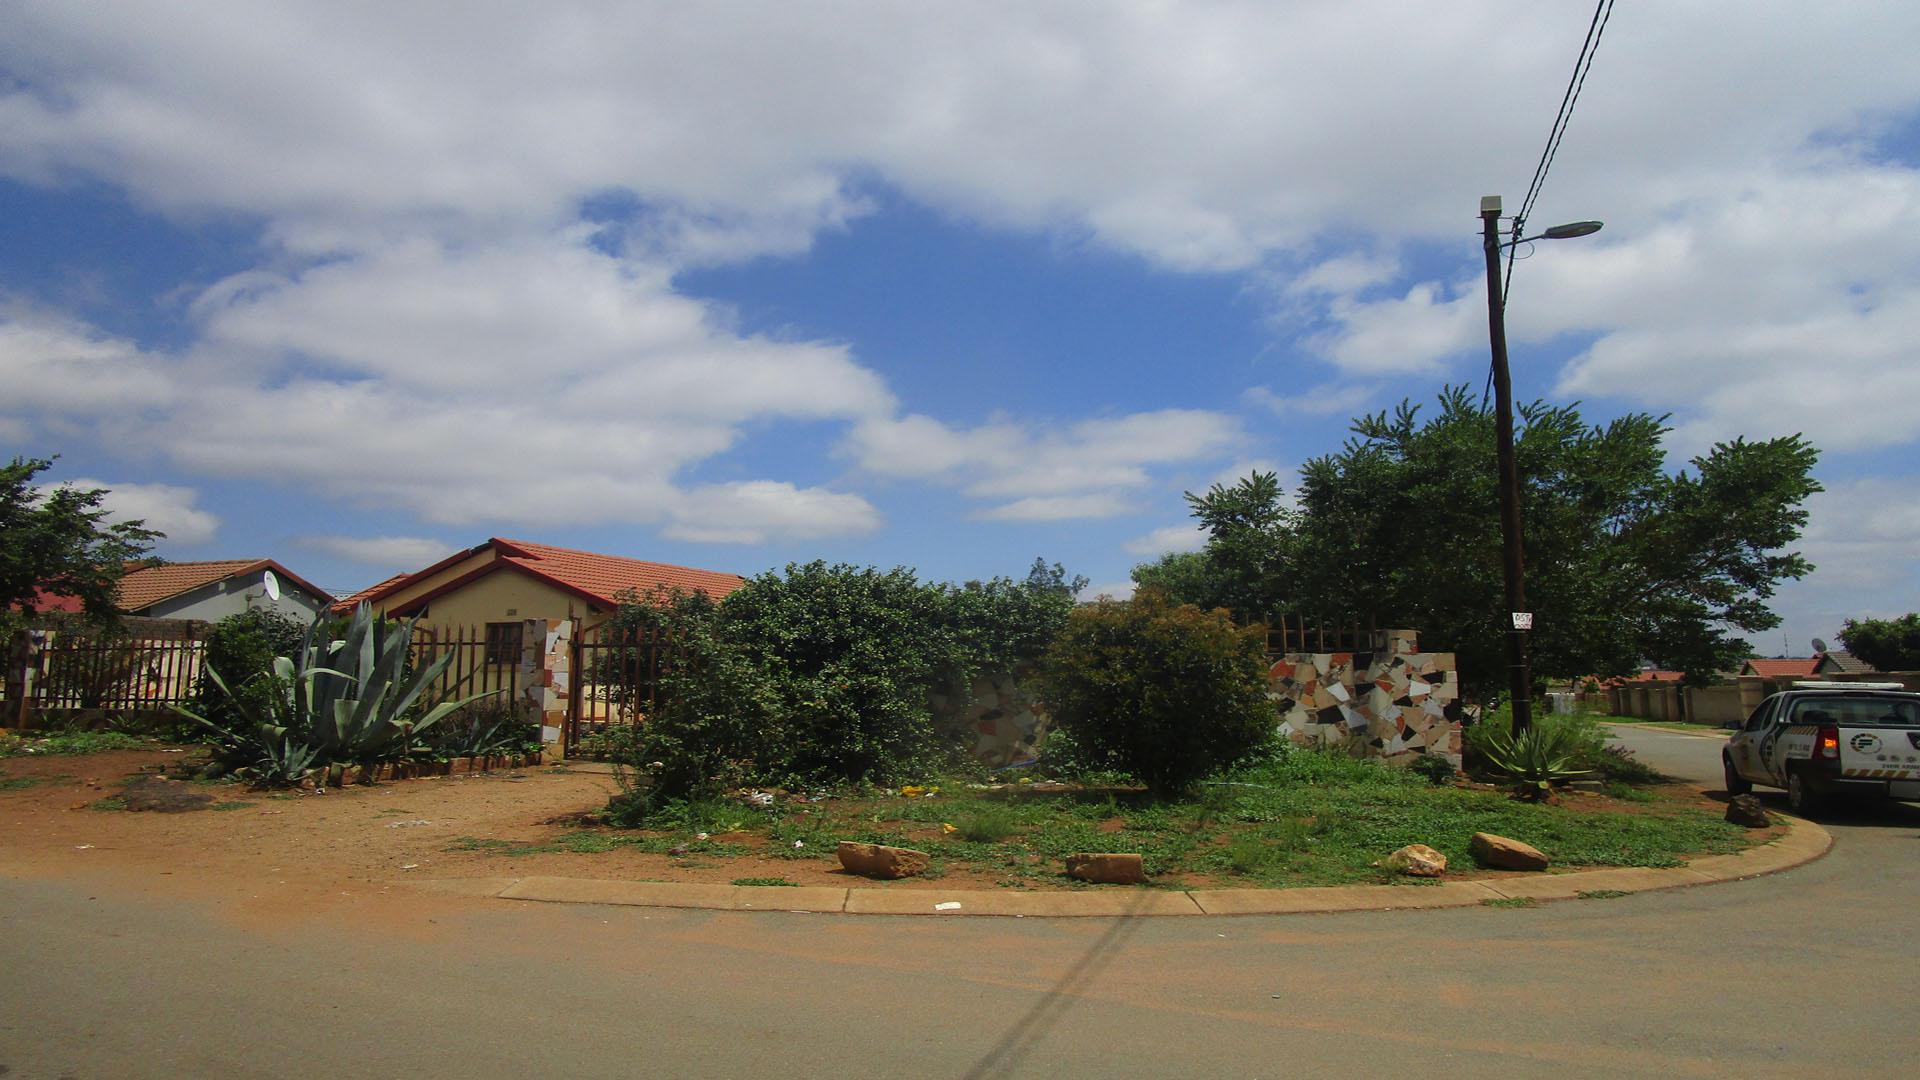 Front View of property in Protea Glen